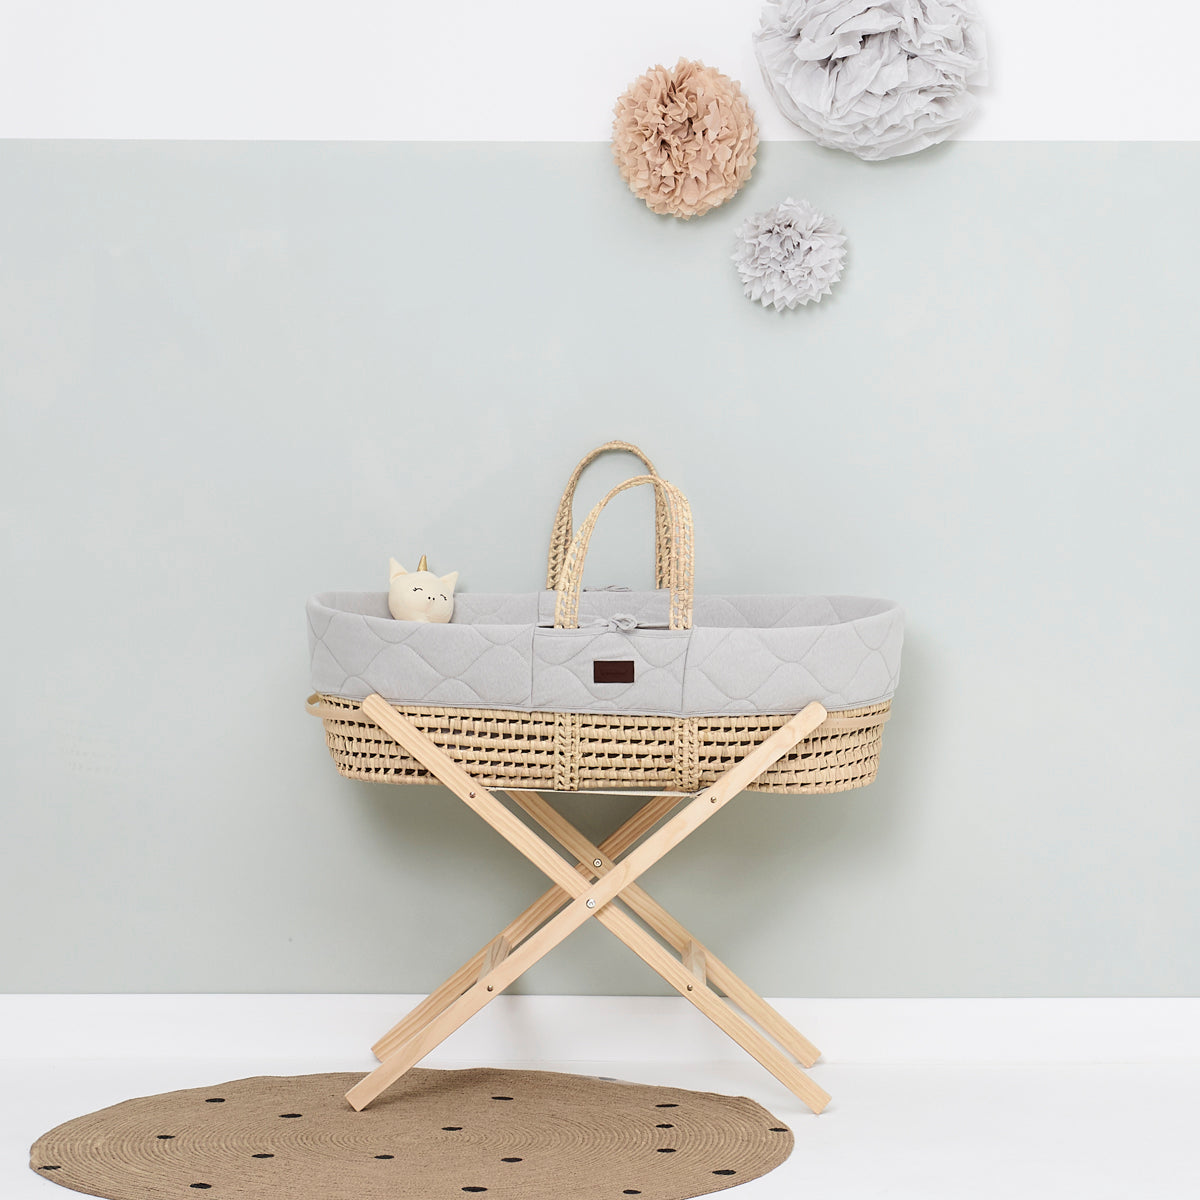 The Little Green Sheep Natural Quilted Moses Basket, Mattress & Stand- Dove